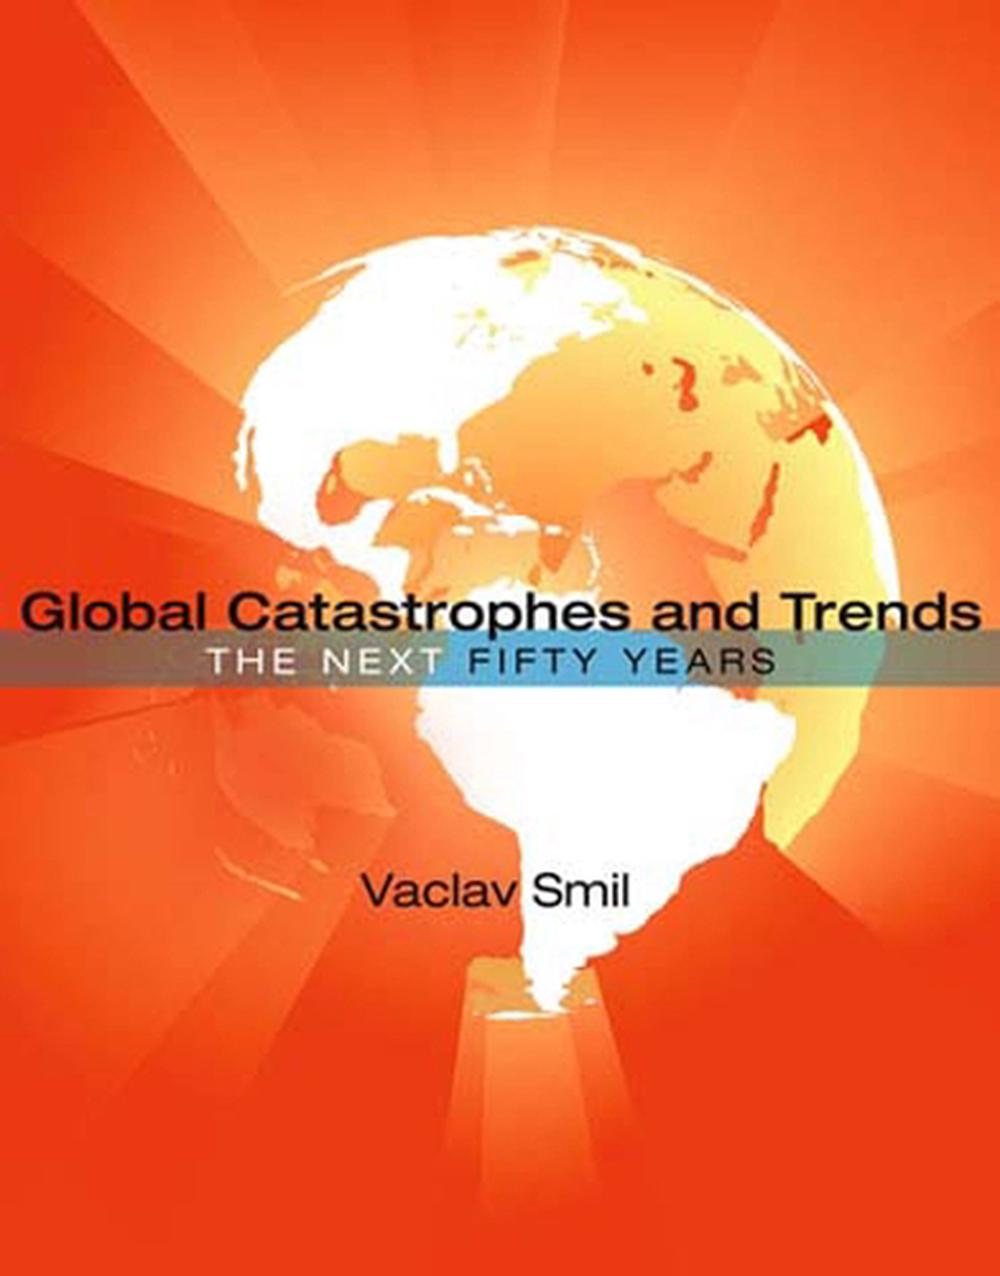 online　Global　Paperback,　Trends:　by　Vaclav　The　Smil,　Next　Buy　50　Nile　Years　9780262518222　at　The　Catastrophes　and